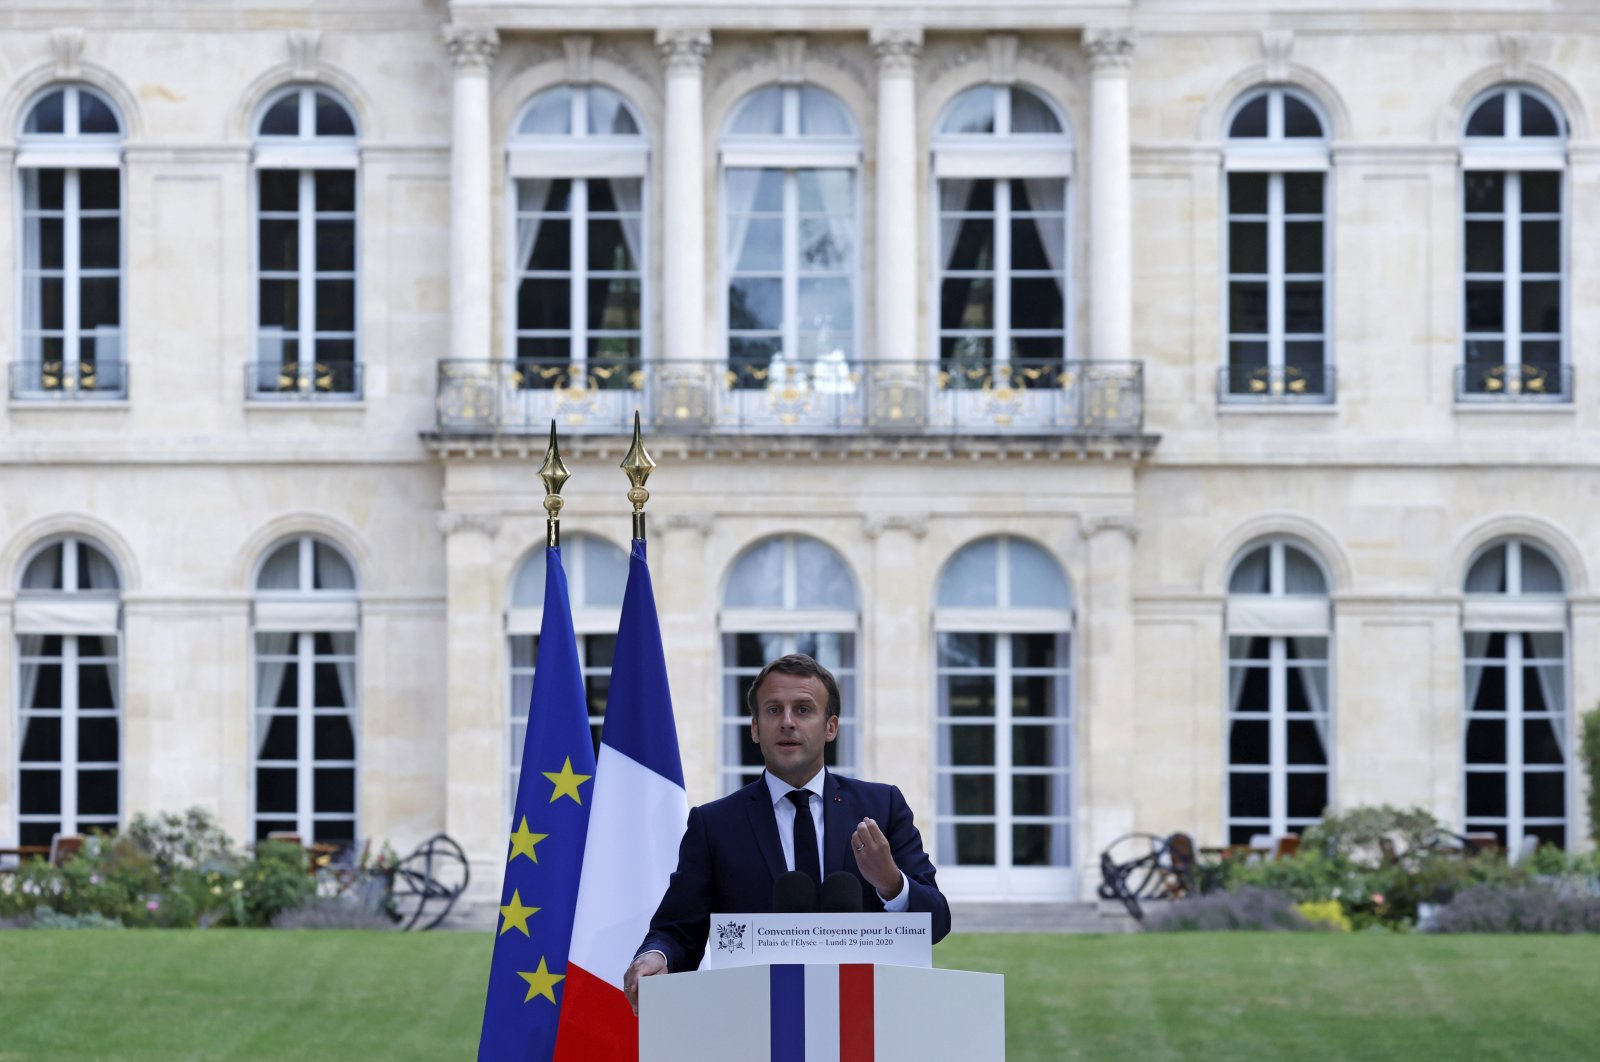 French President Emmanuel Macron delivers a speech at the Elysee Palace in Paris, June 29, 2020. (AP Photo)